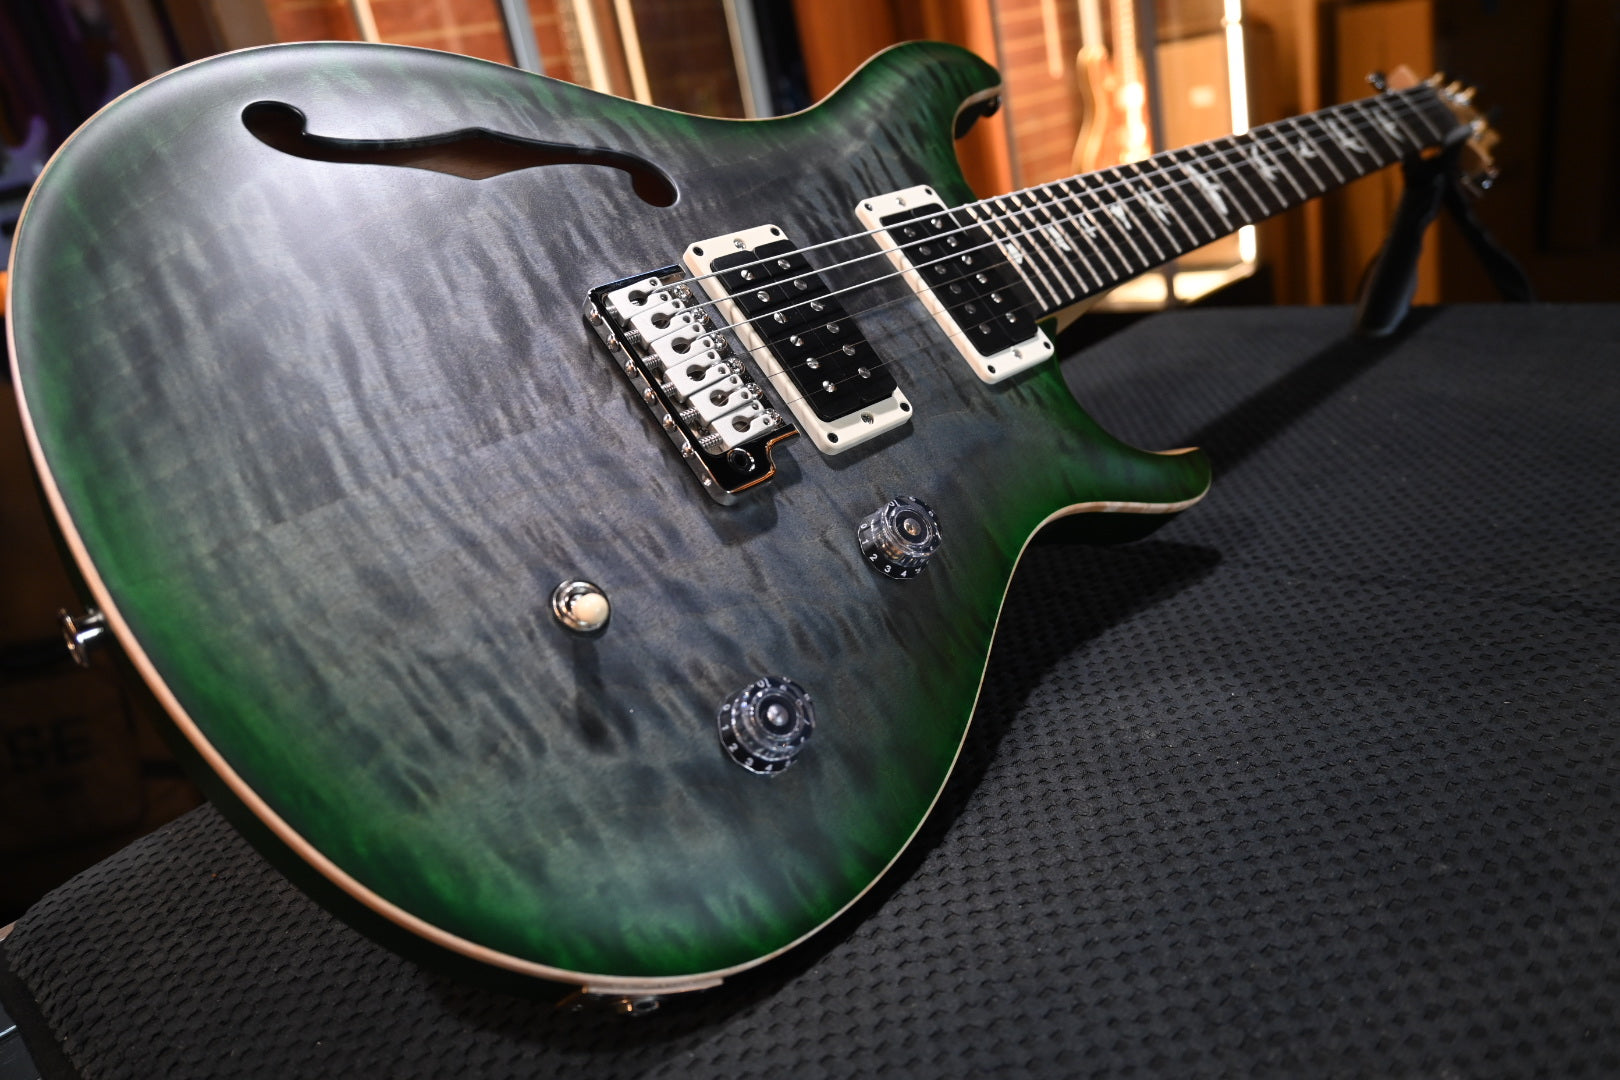 PRS Wood Library CE 24 Semi-Hollow Quilt - Faded Grey Black Green Burst Satin Guitar #5478 - Danville Music